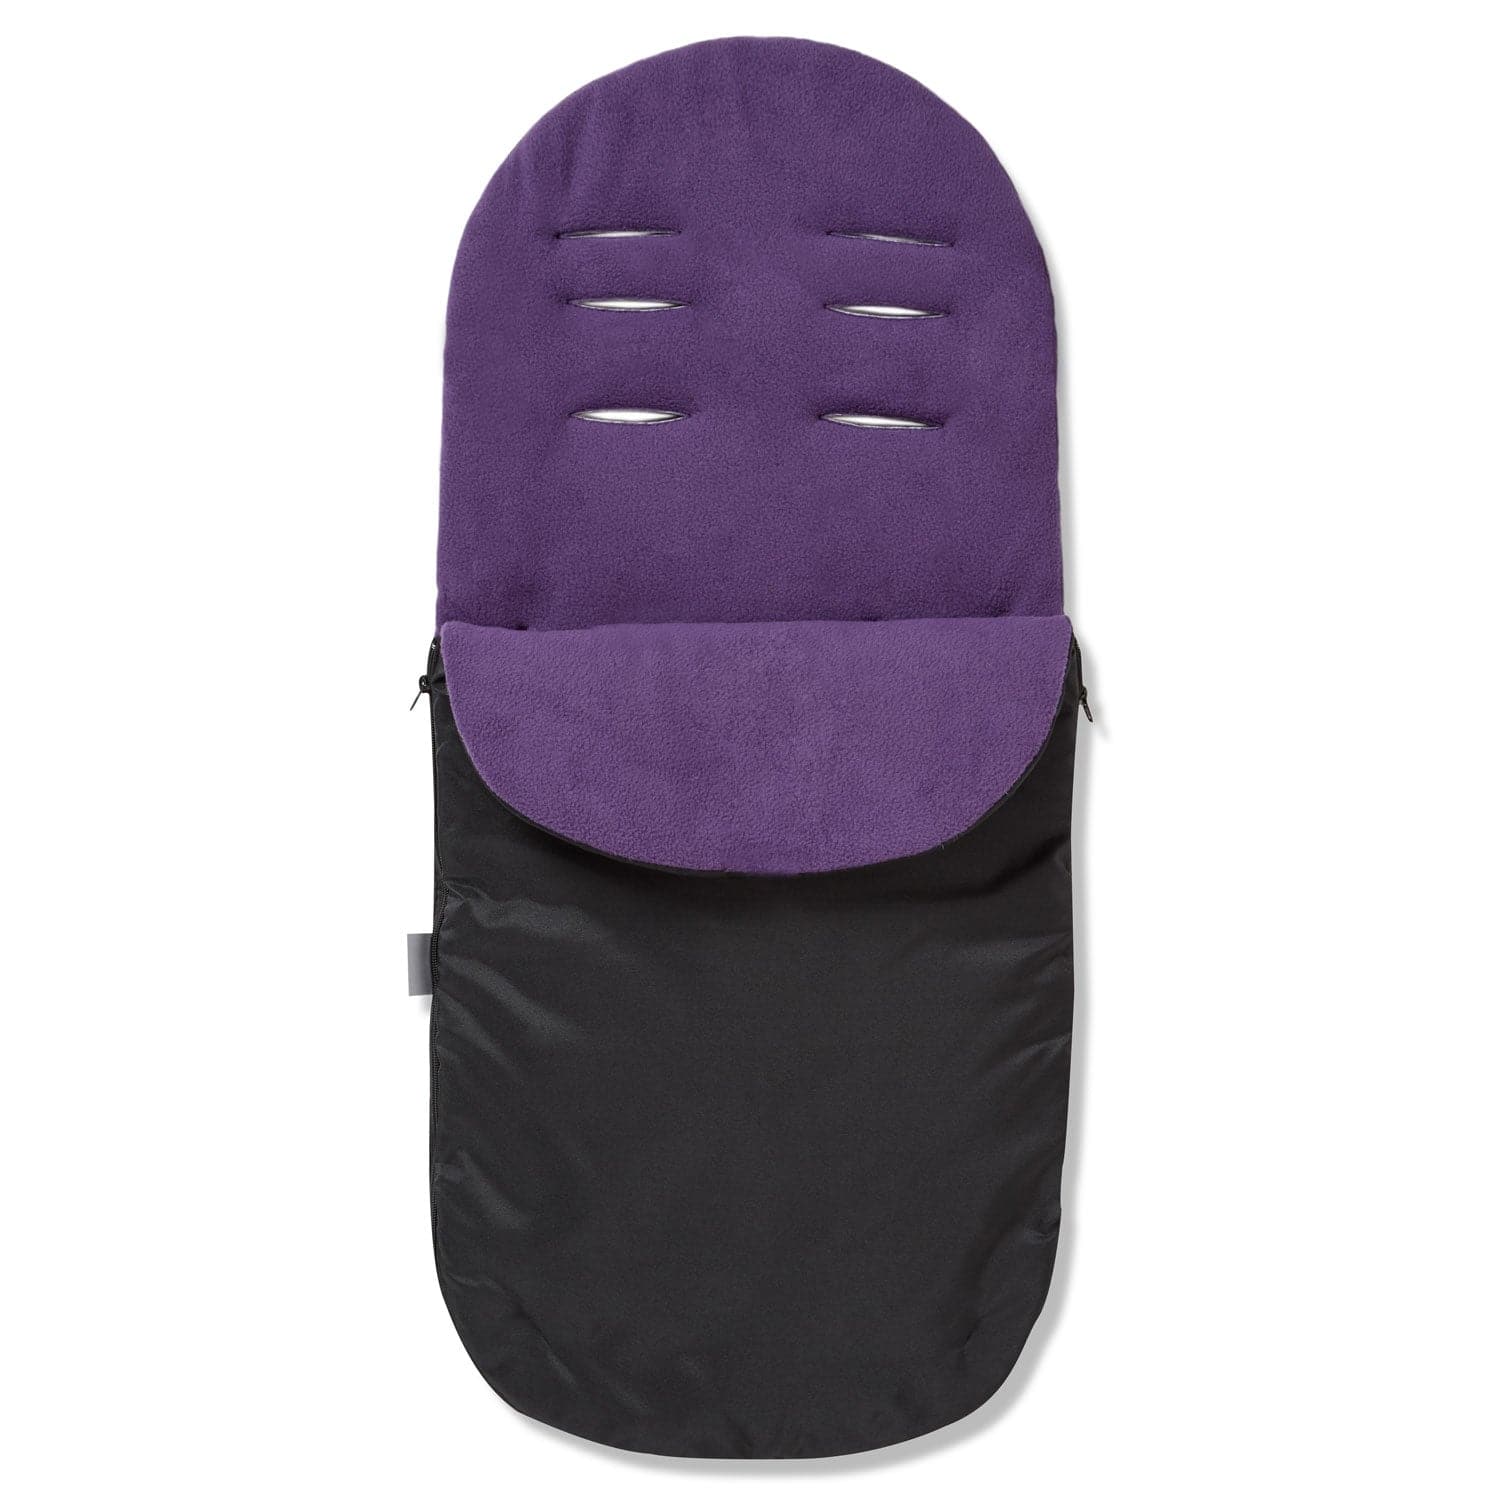 Footmuff / Cosy Toes Compatible with Urban Detour - Purple / Fits All Models | For Your Little One